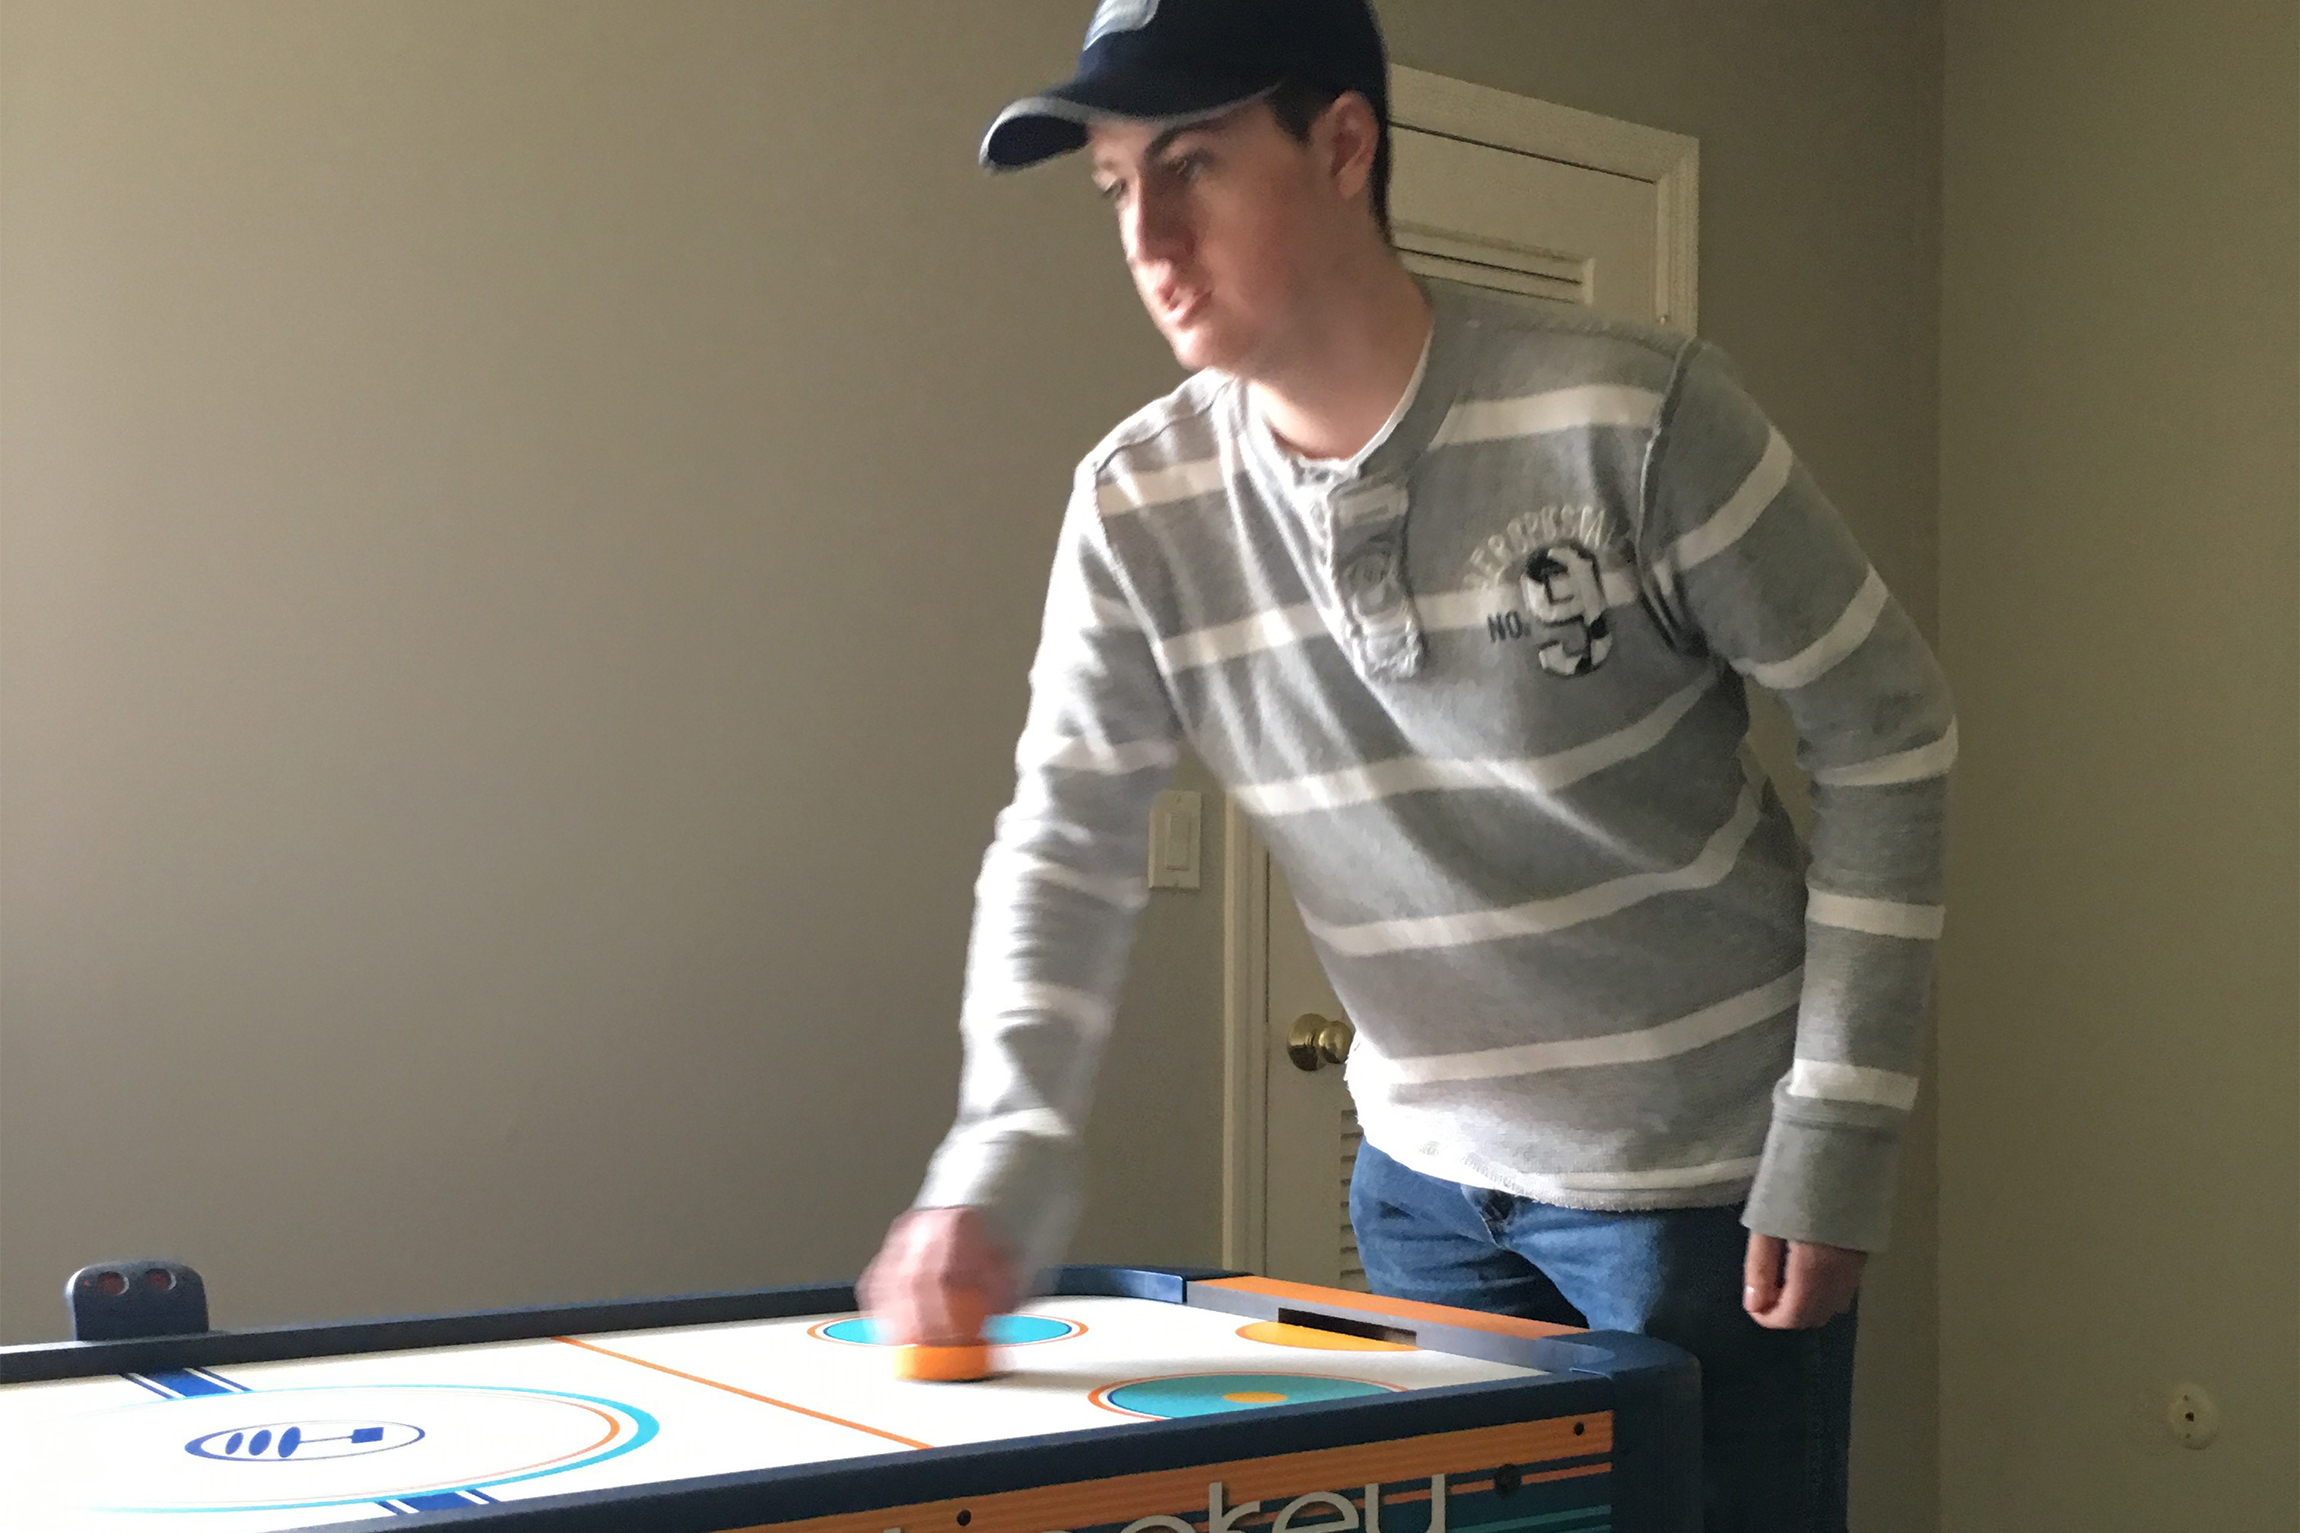 Playing with the air hockey table is a time for peer socialization.